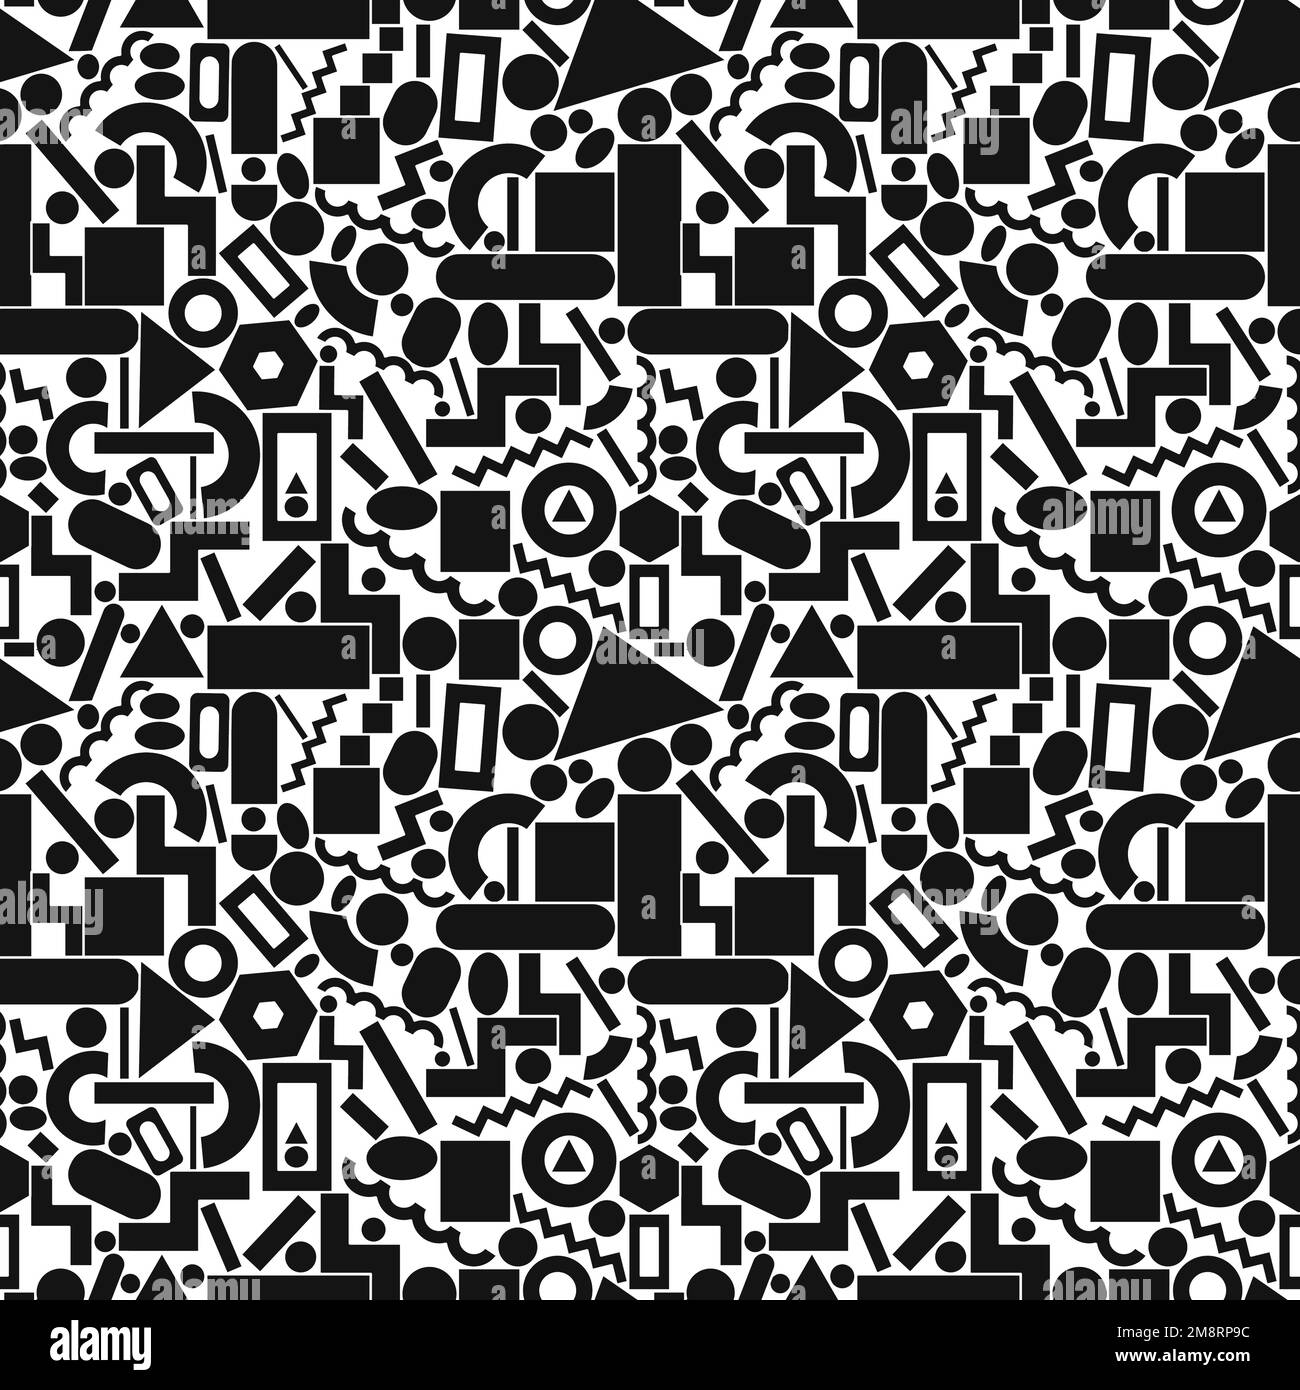 70s wallpaper Black and White Stock Photos & Images - Alamy